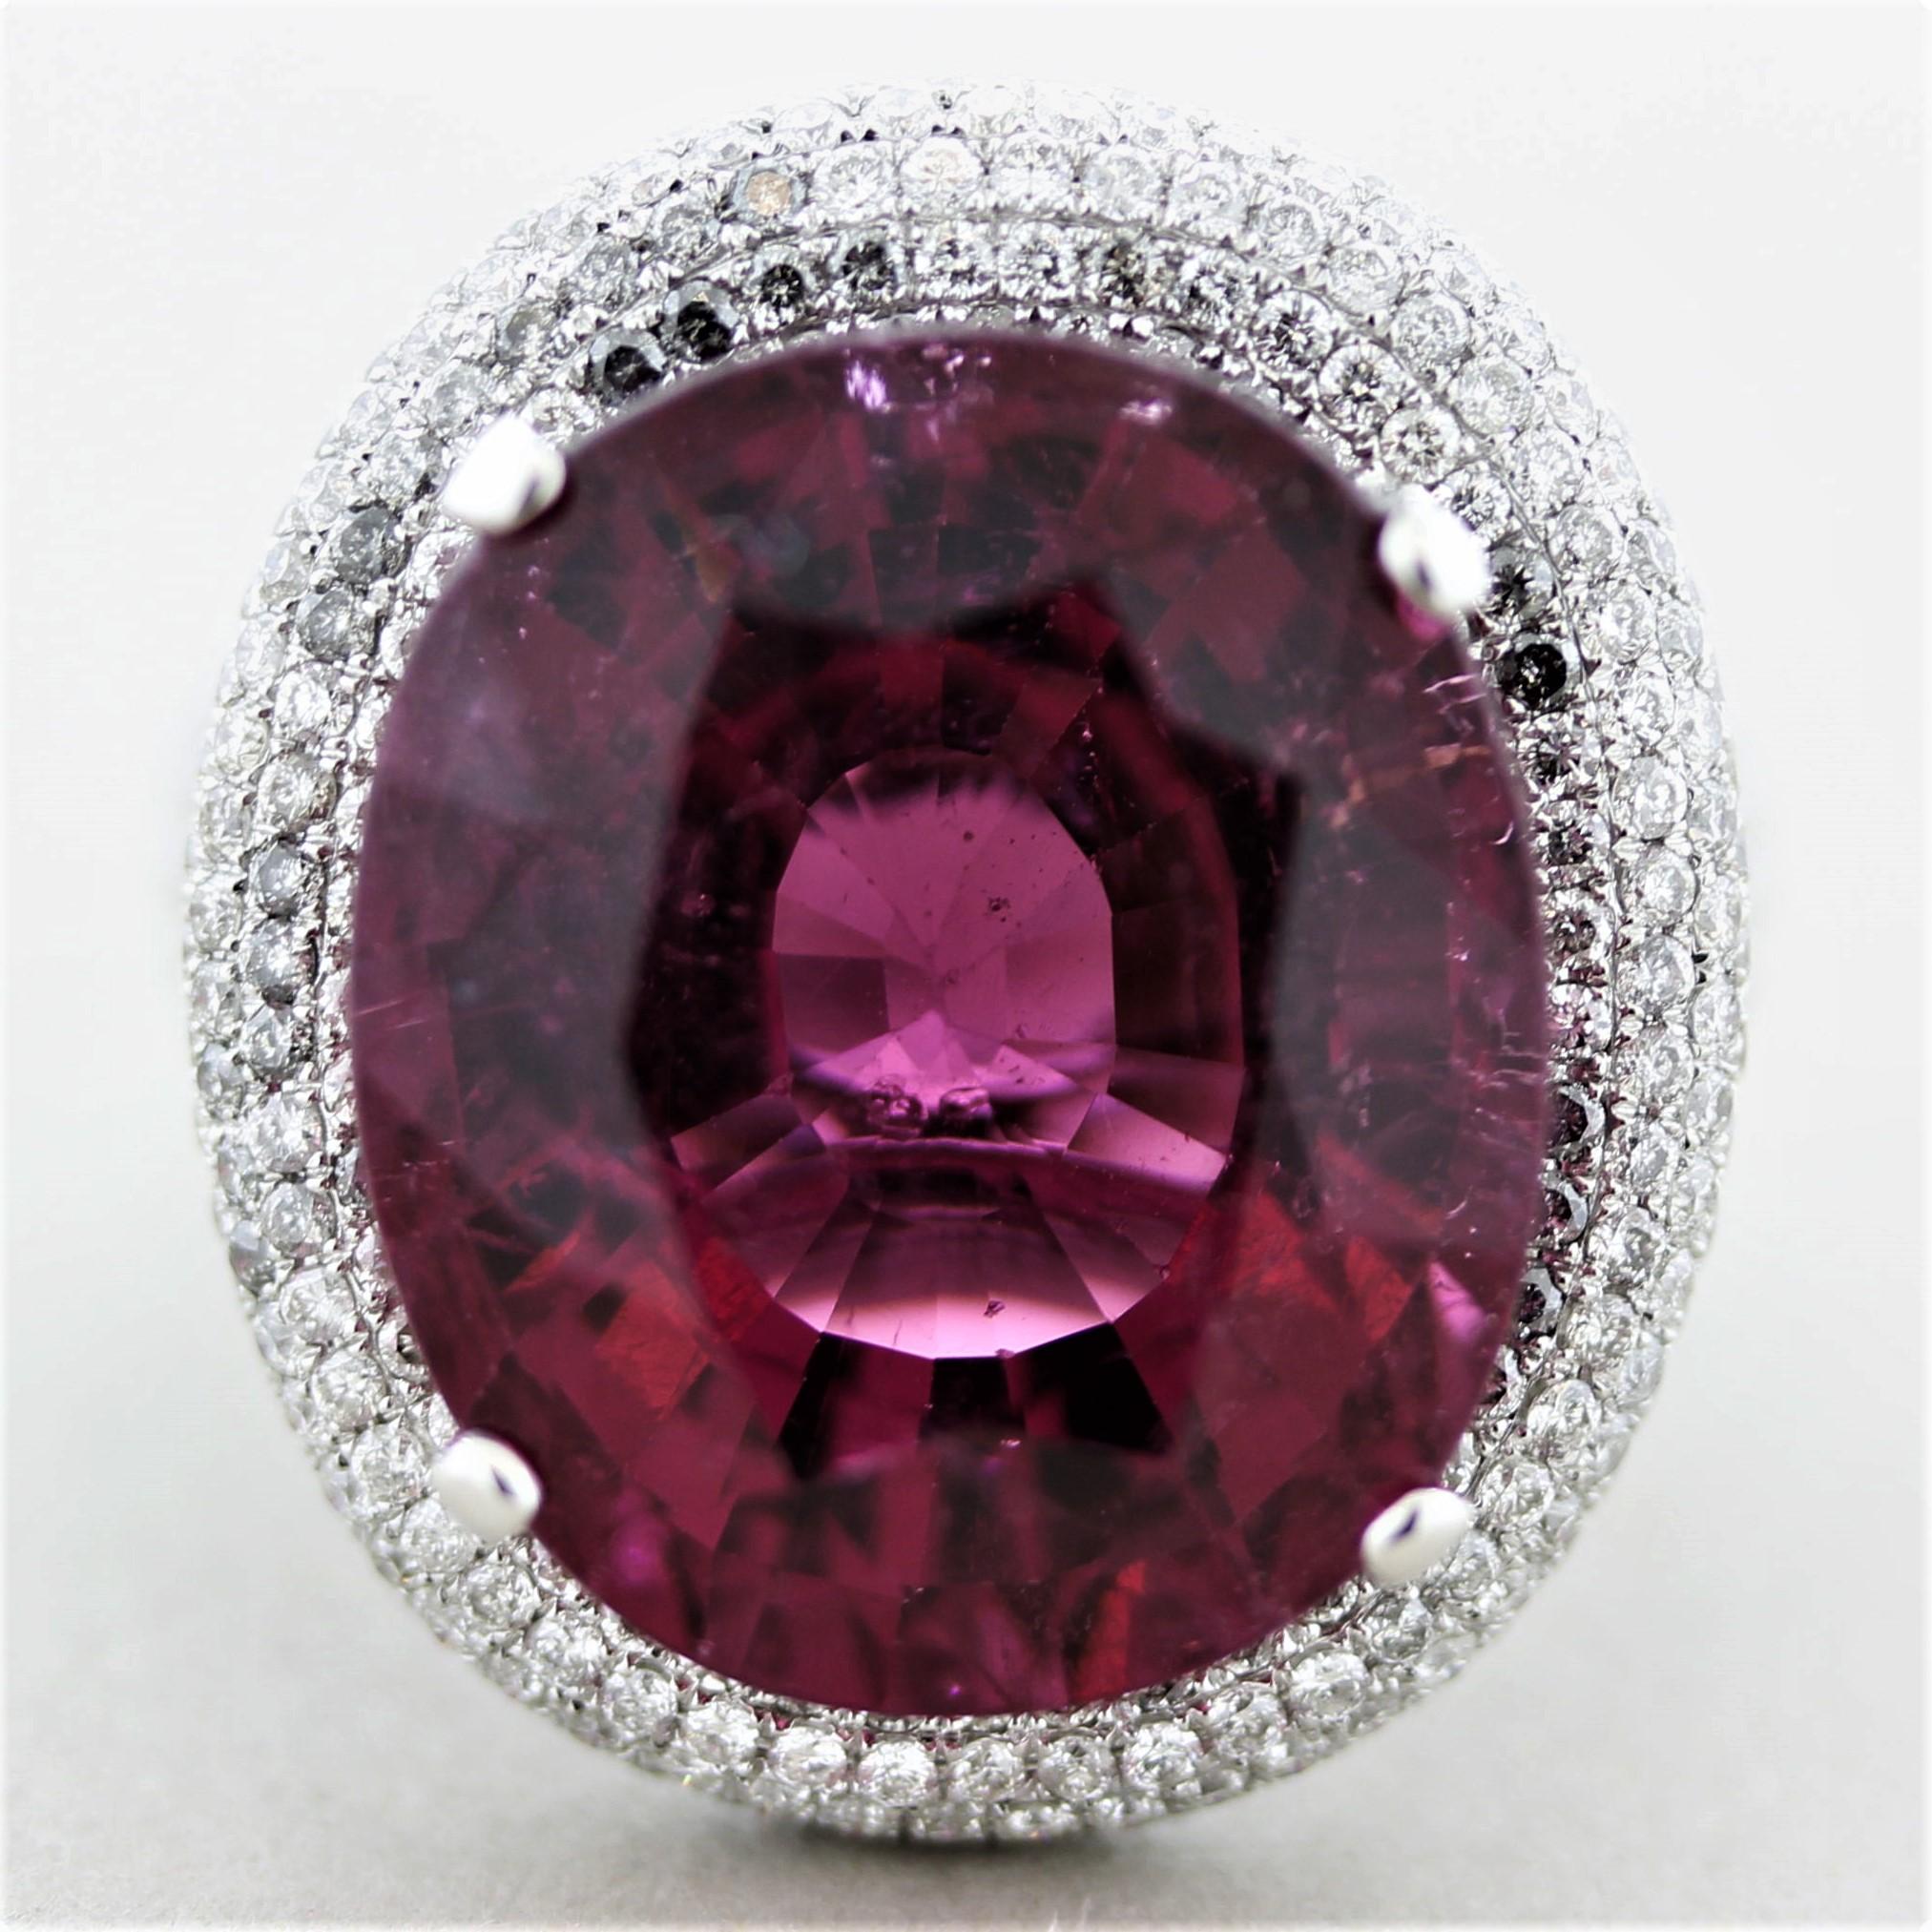 An extra fine and special tourmaline takes center stage. The tourmaline has a bright and intense top quality raspberry red color and weighs a staggering 21.56 carats. An exceptional stone for its size, color, clarity, and brilliance. It is accented